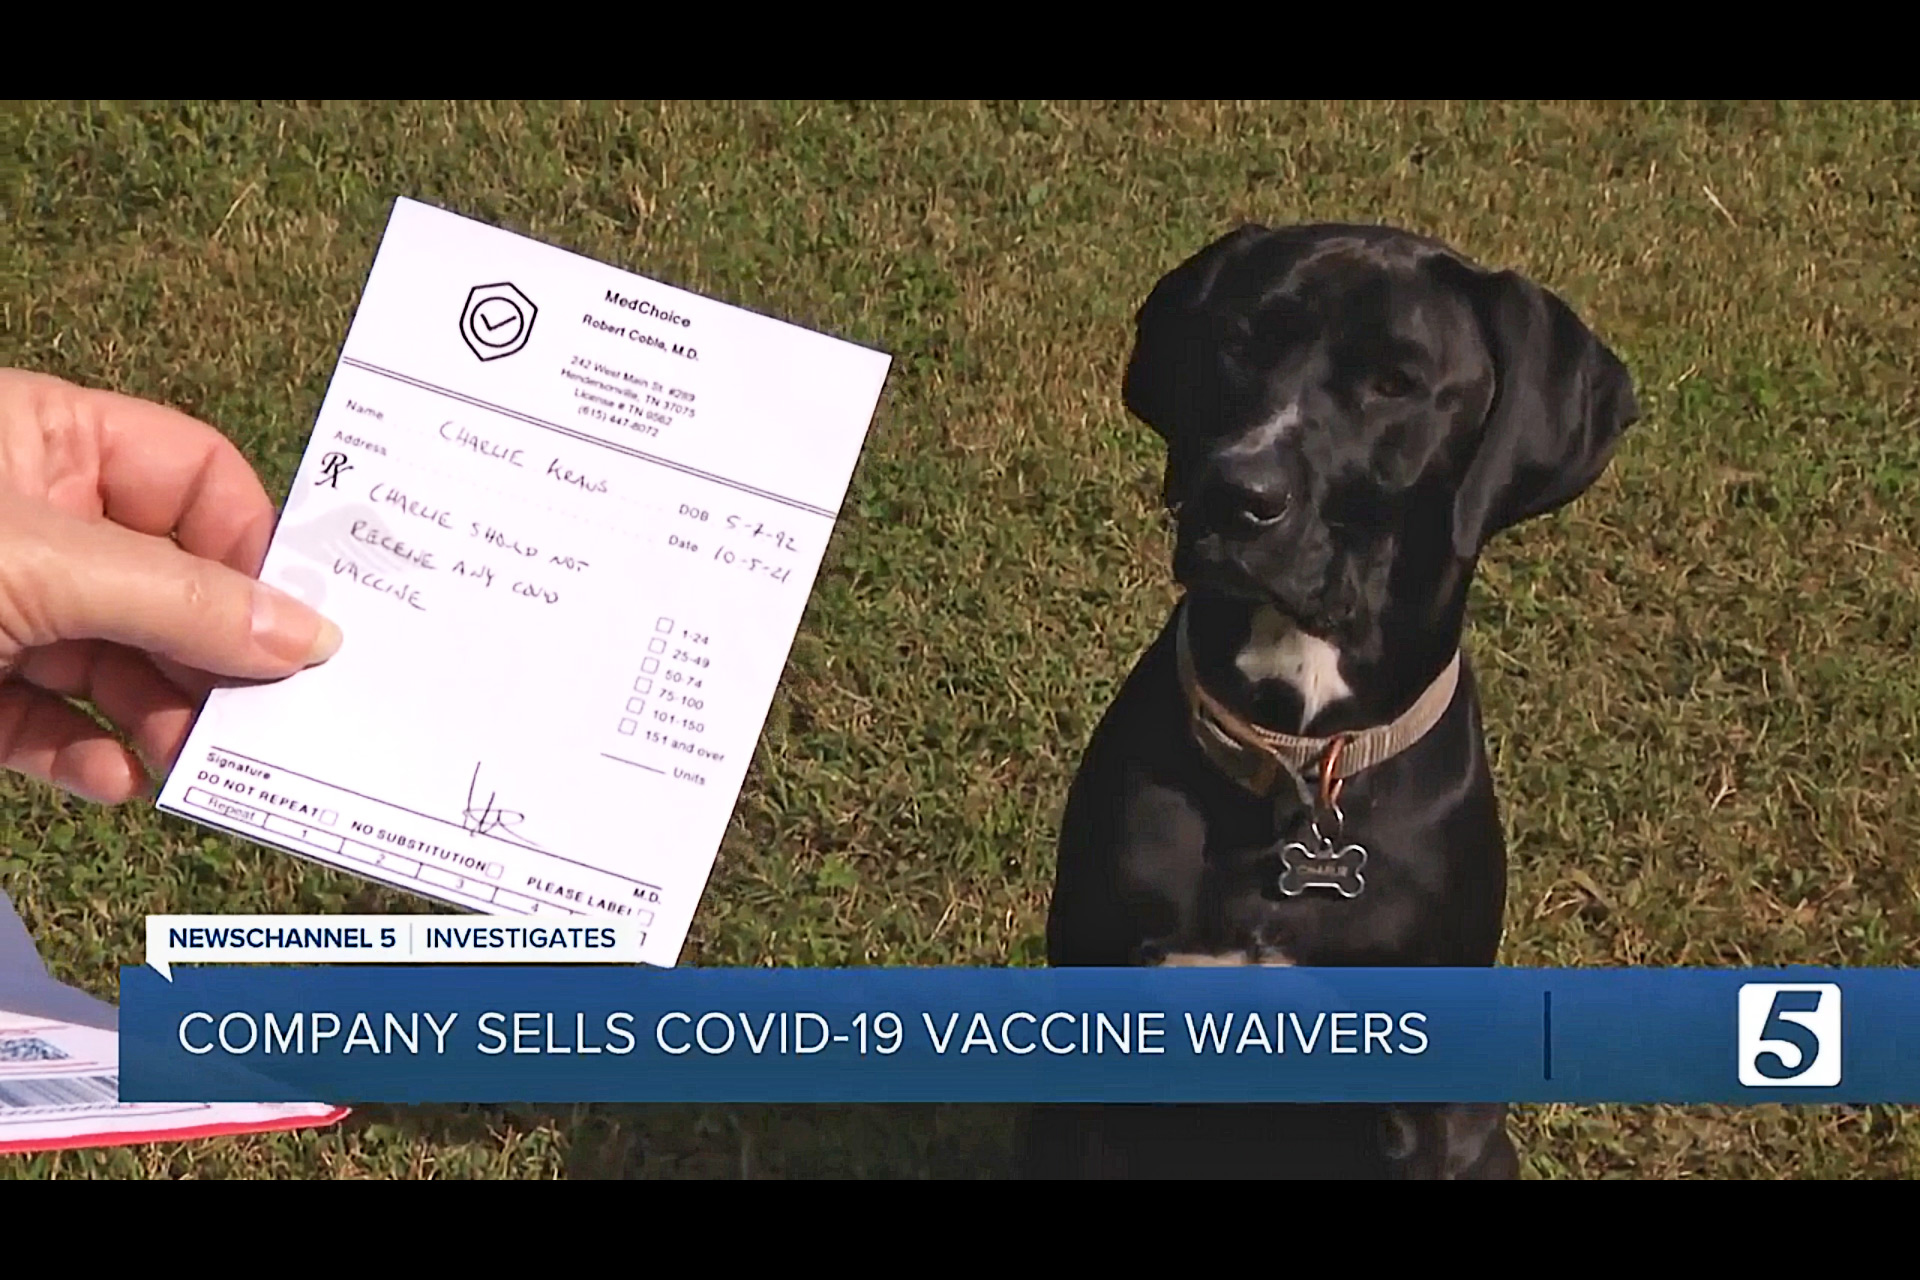 Doctor Lands in the Doghouse After Giving Covid Vaccine Waivers Too Freely